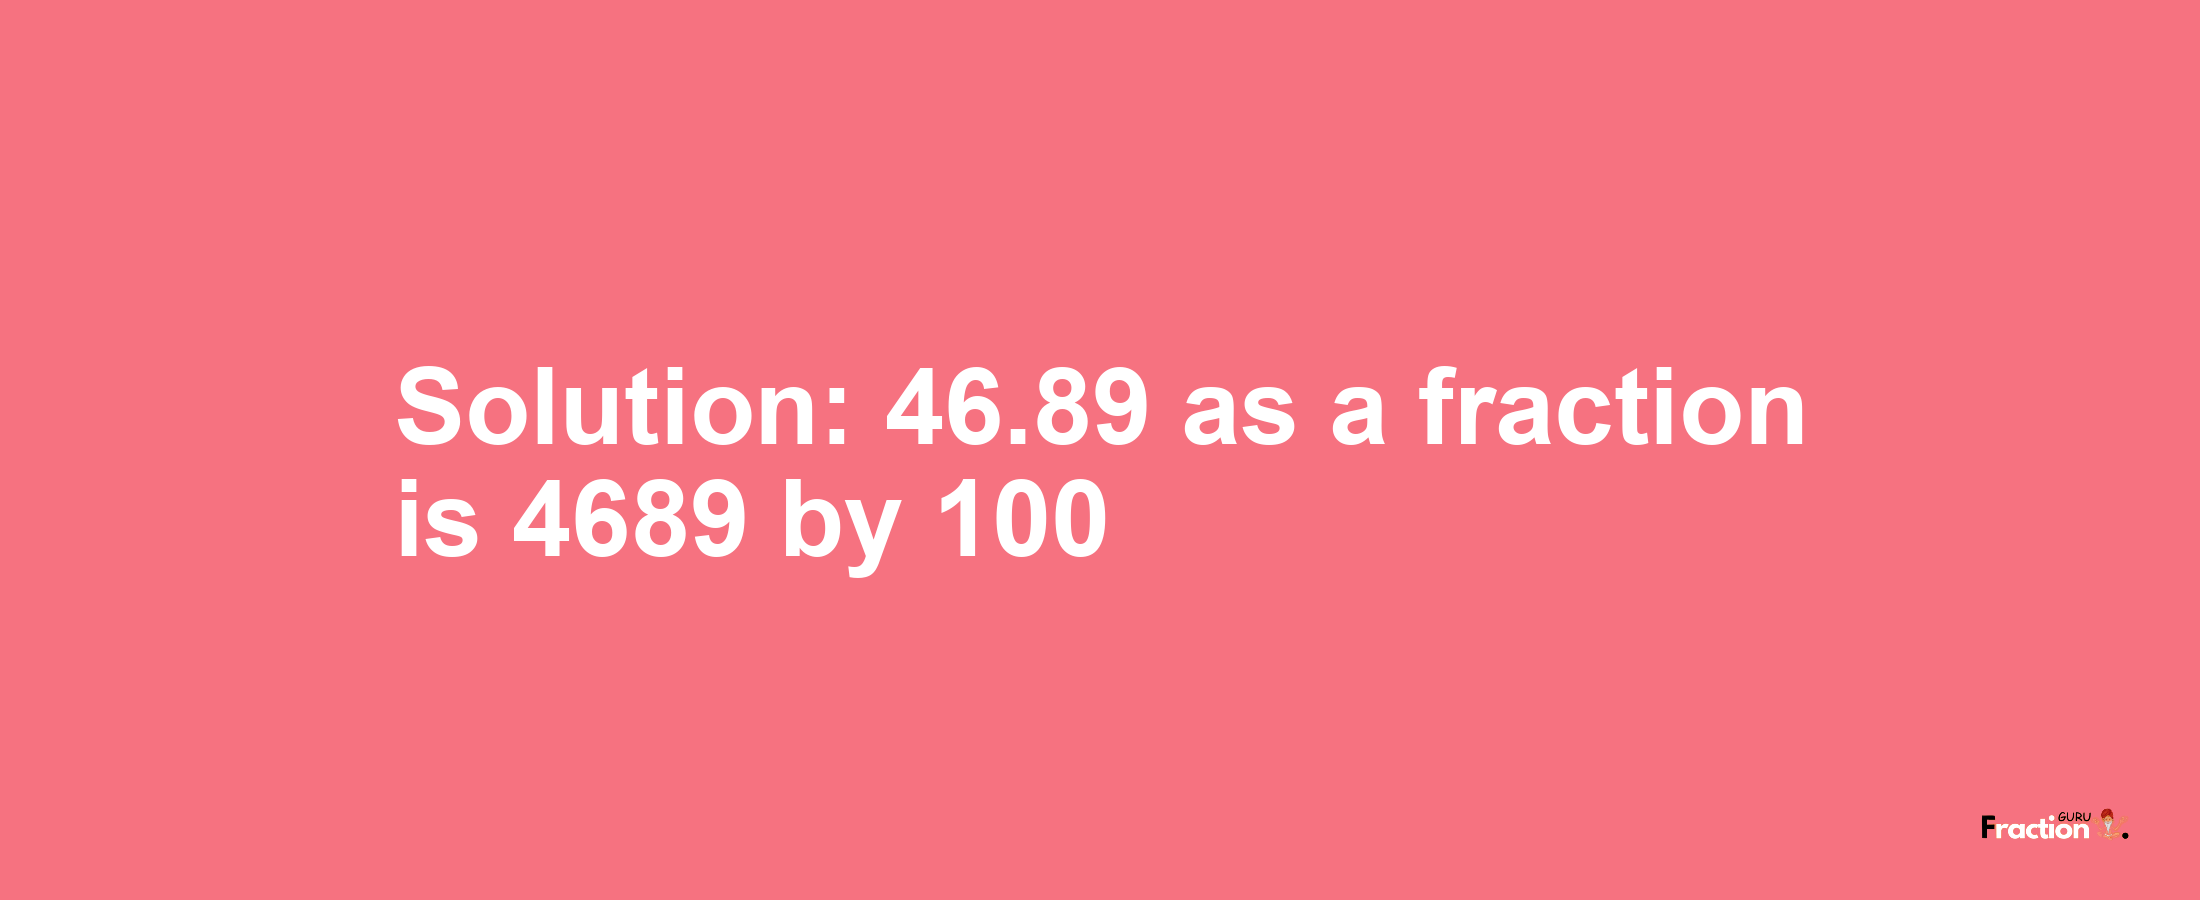 Solution:46.89 as a fraction is 4689/100